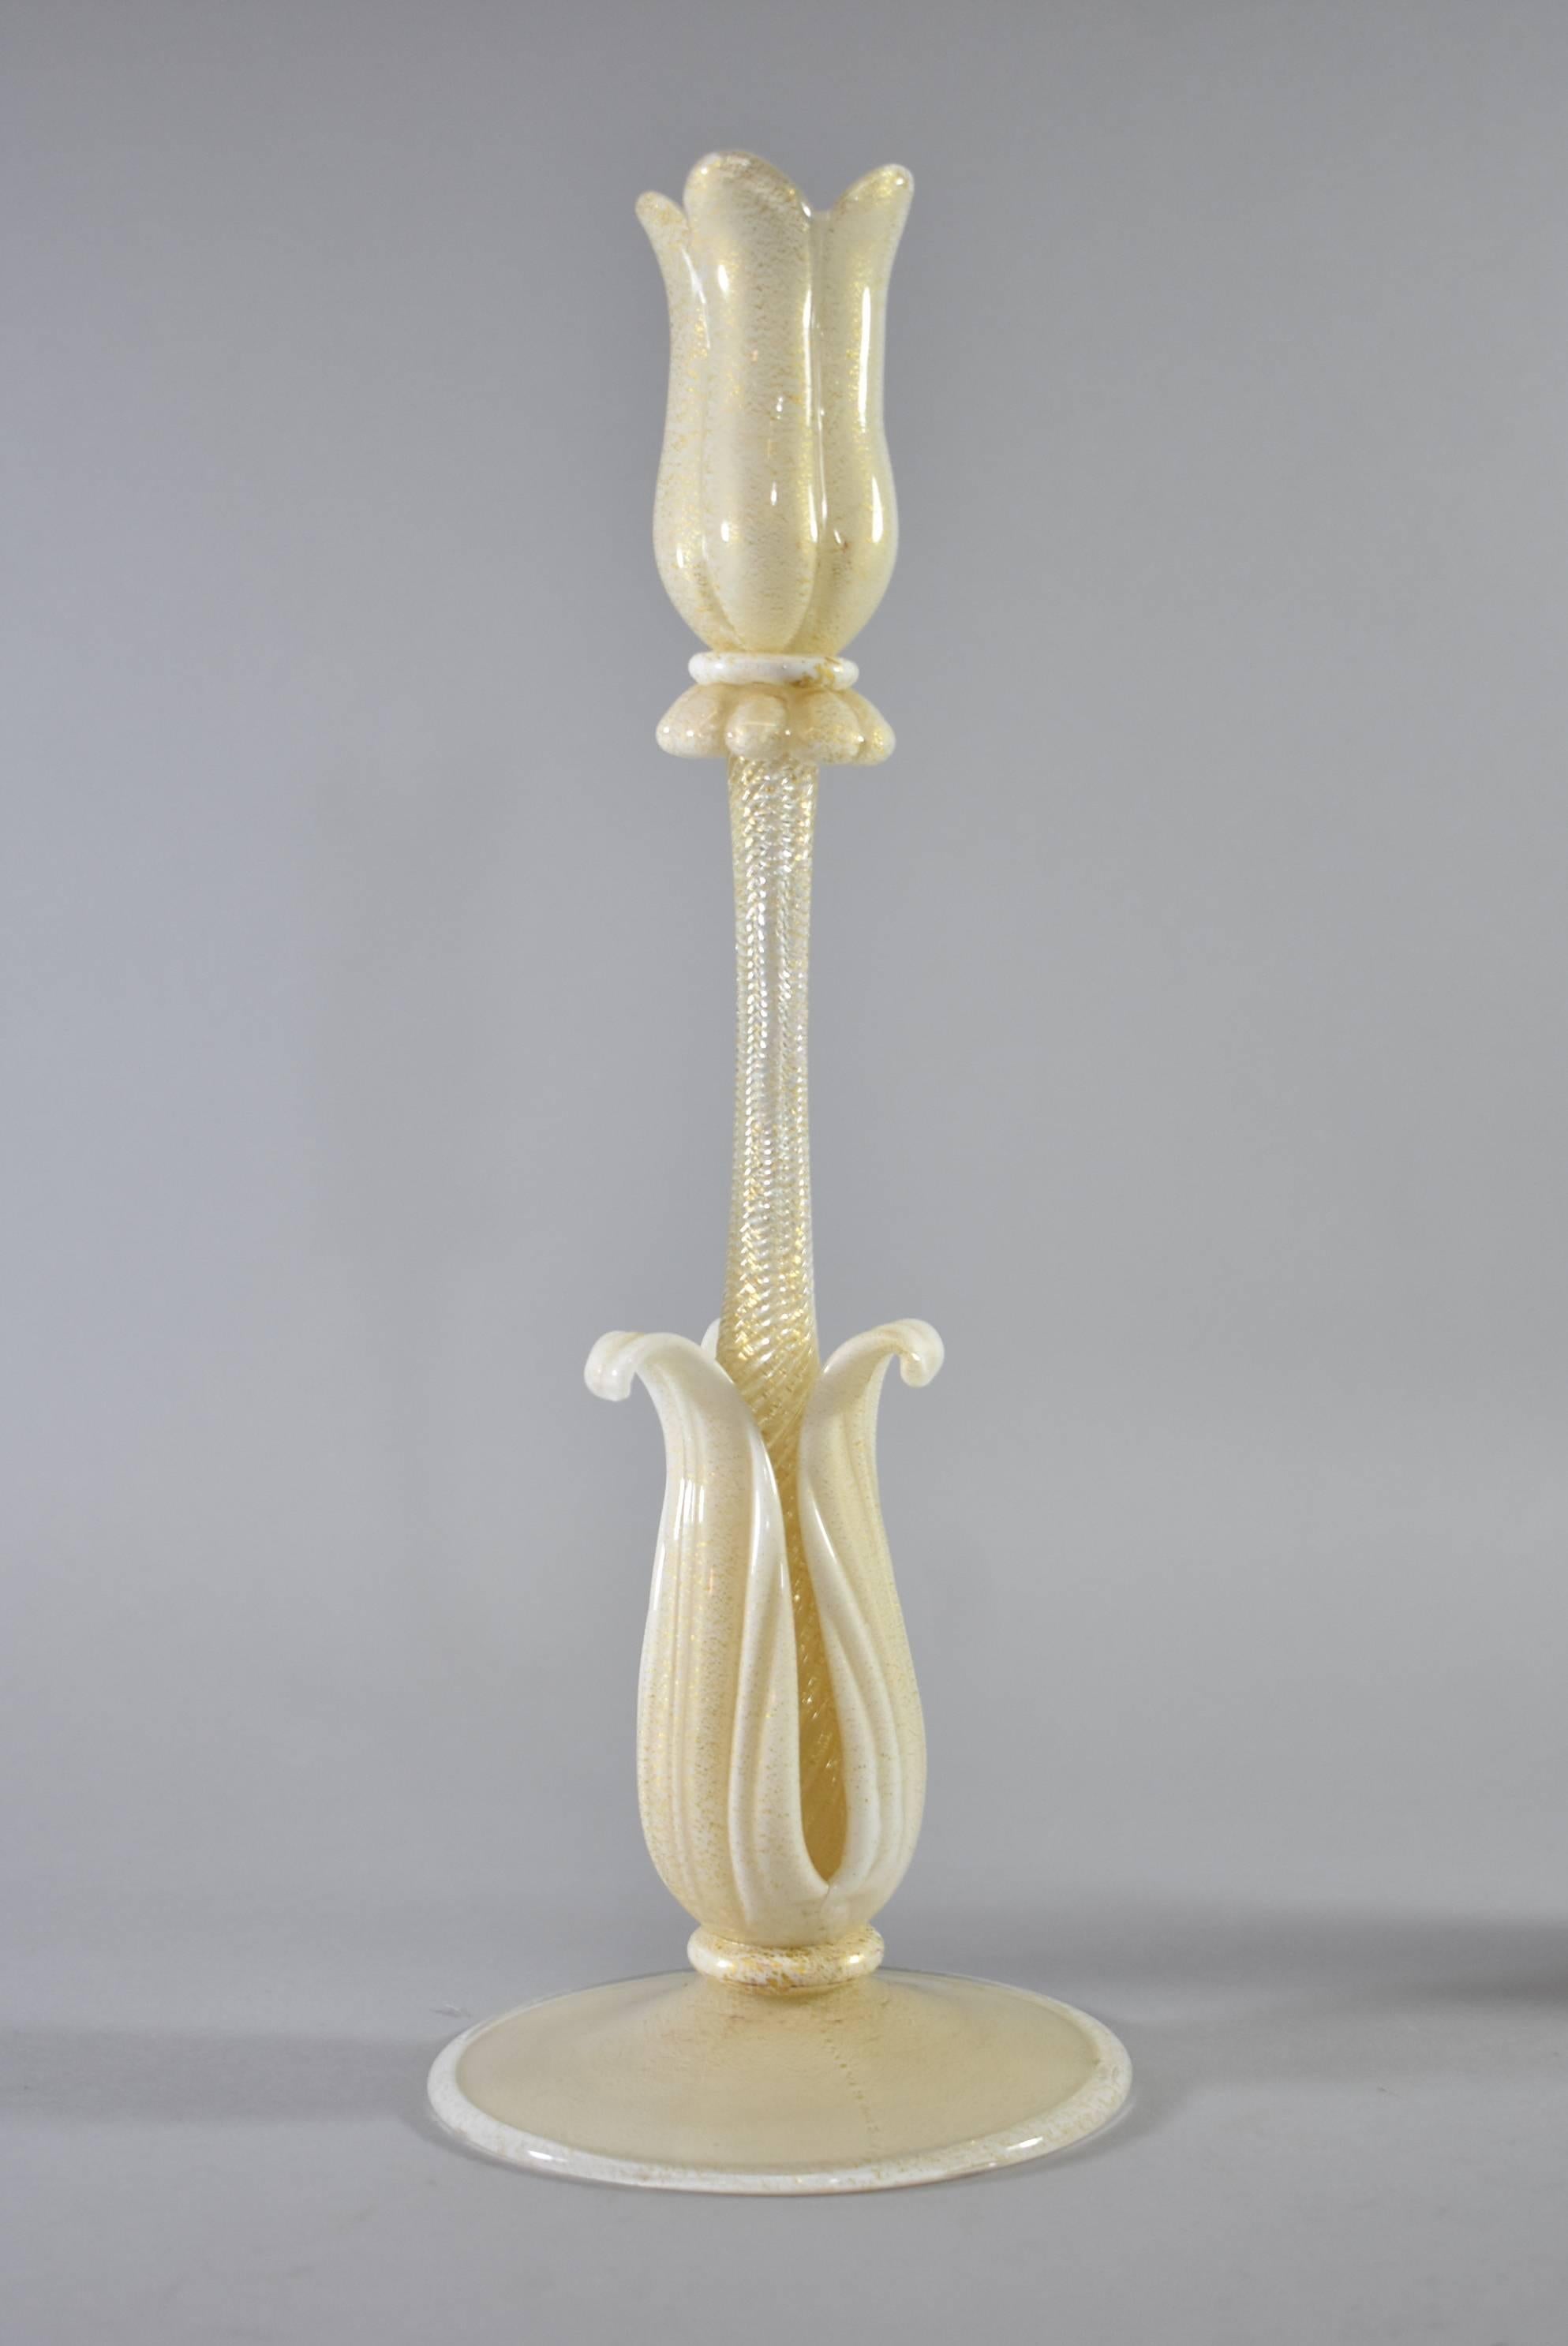 Extremely rare pair of petal-form white and gold Barovier & Toso Murano glass candlesticks. The white foot accented with gold flake issuing a petal form gold stem. The dimensions are 12.25